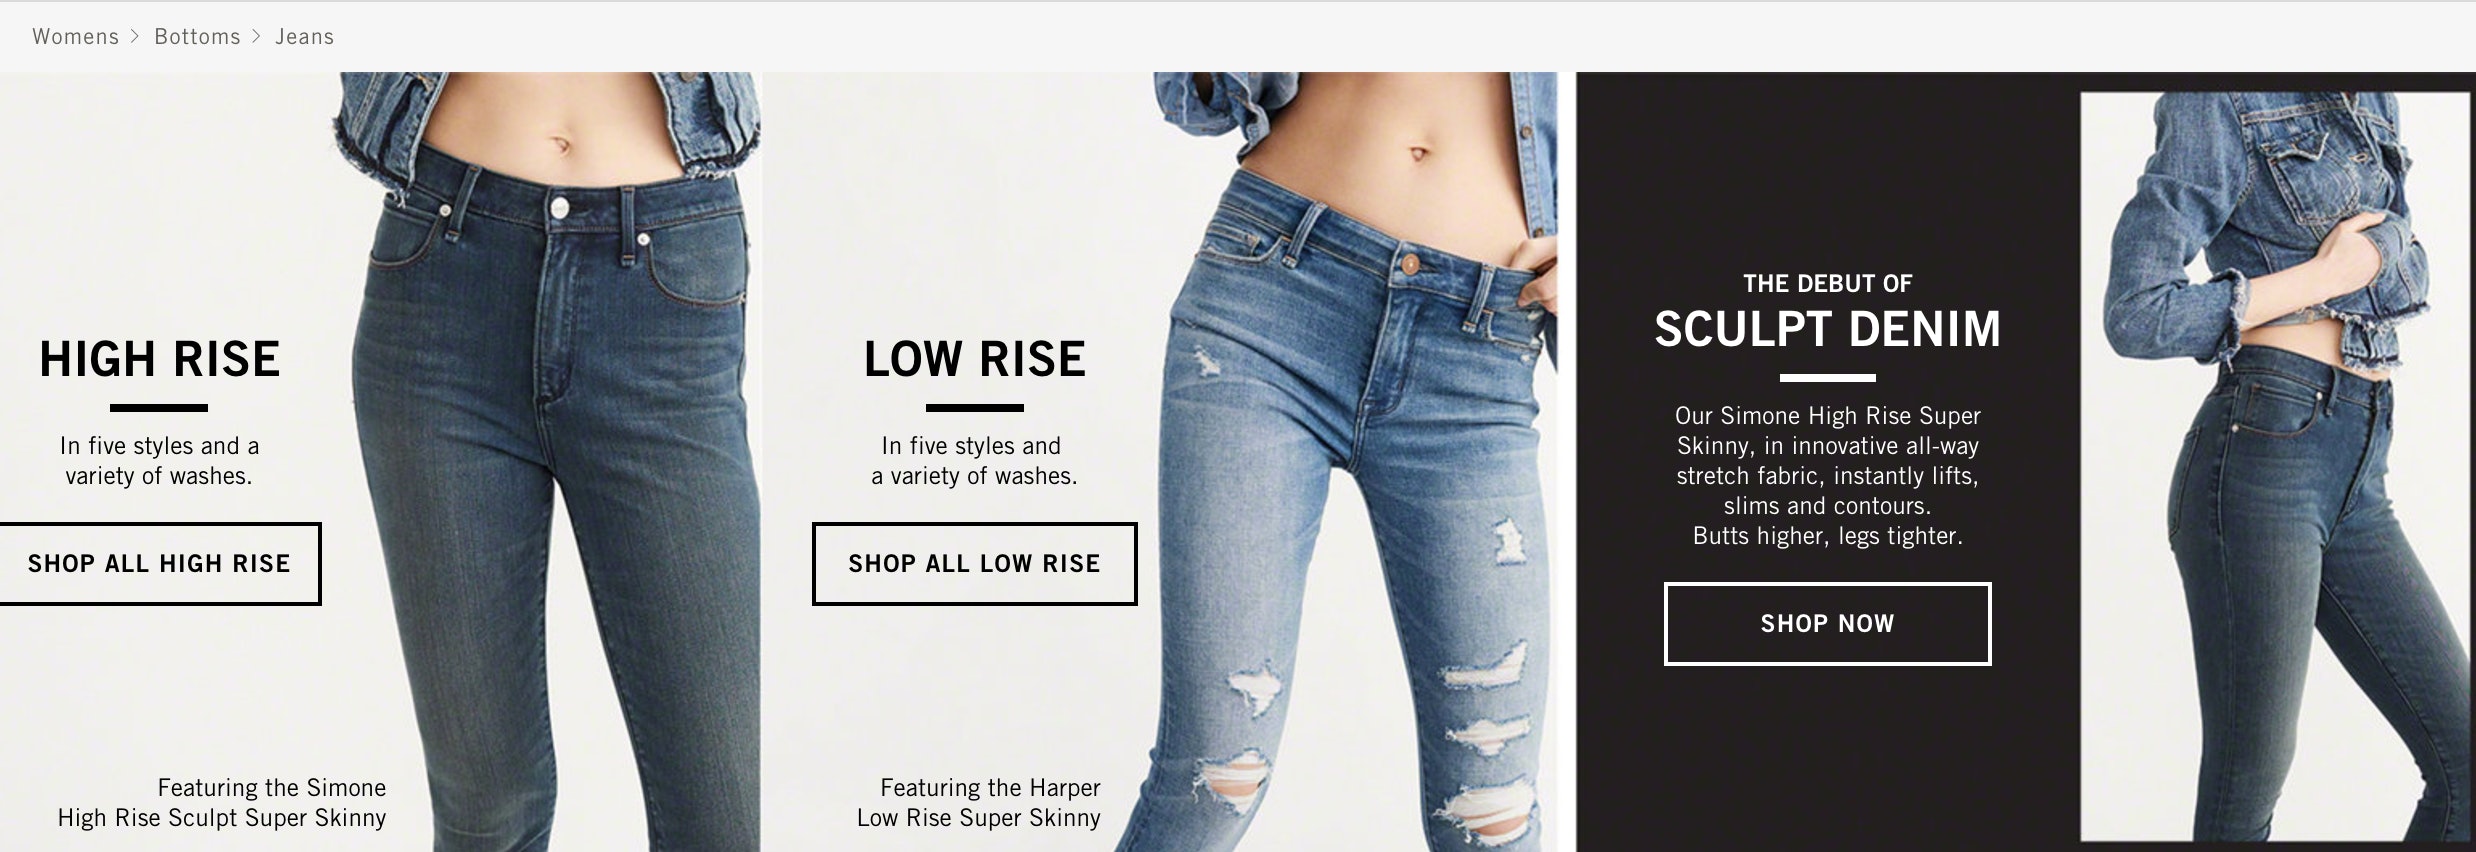 abercrombie fitch simone jeans review